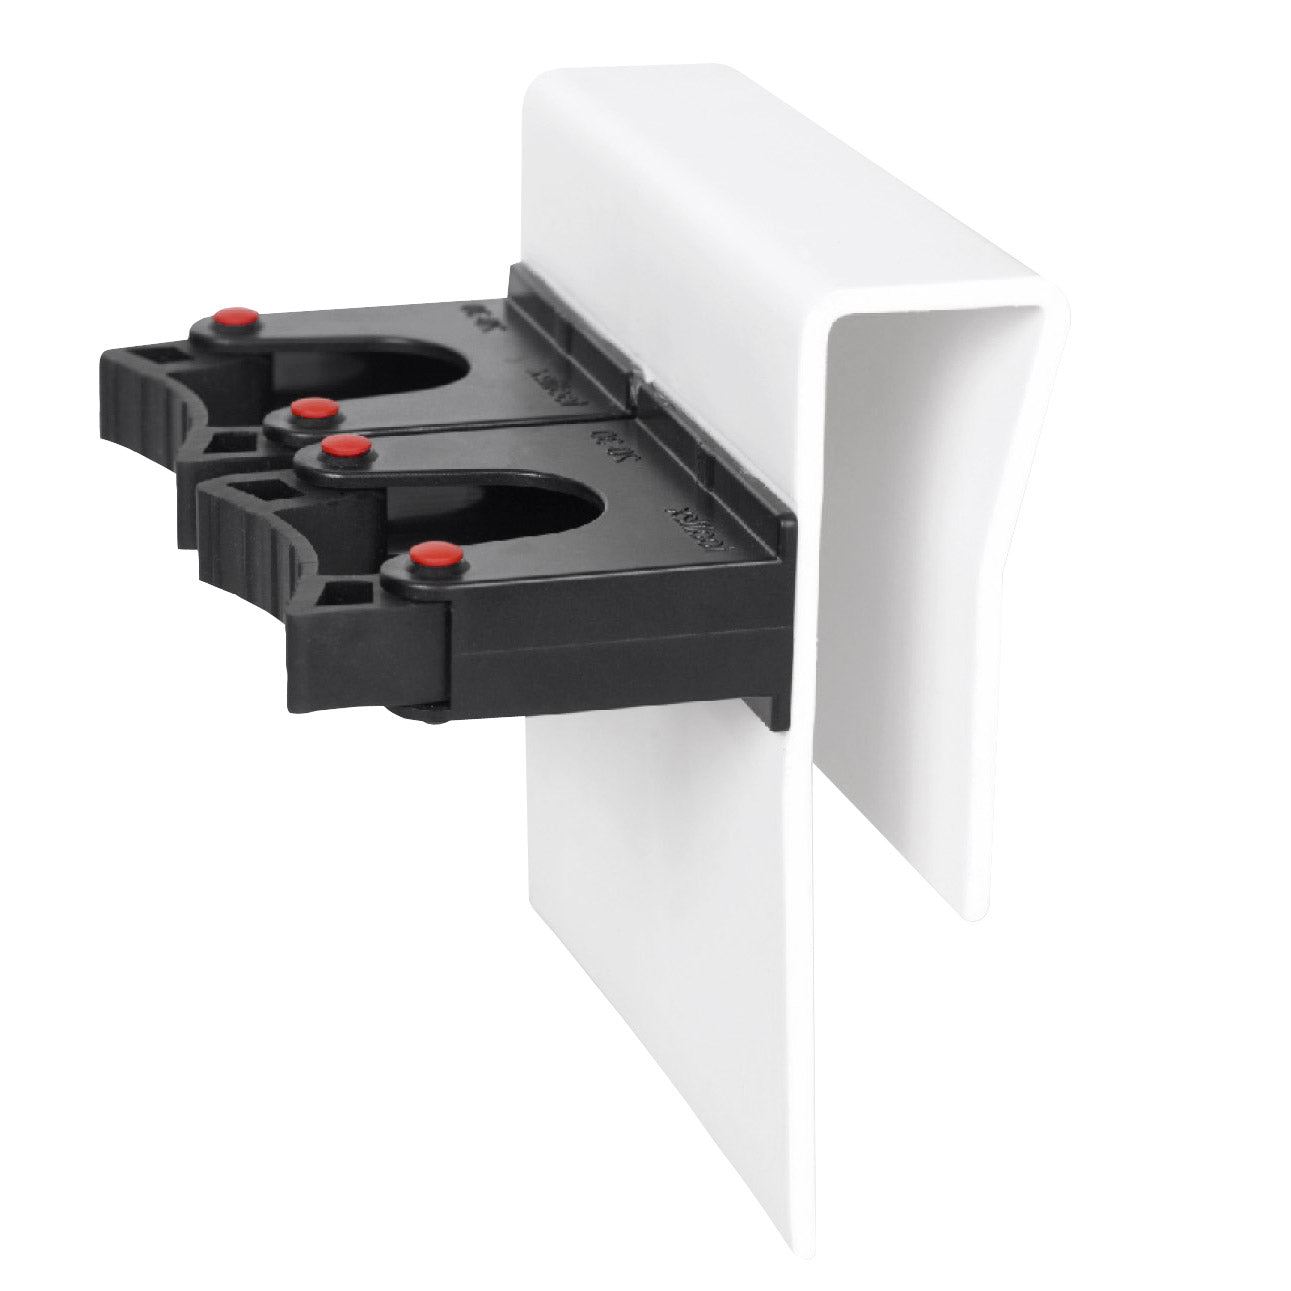 Rebotec Duo Support Clamp - Bedside Crutch Support